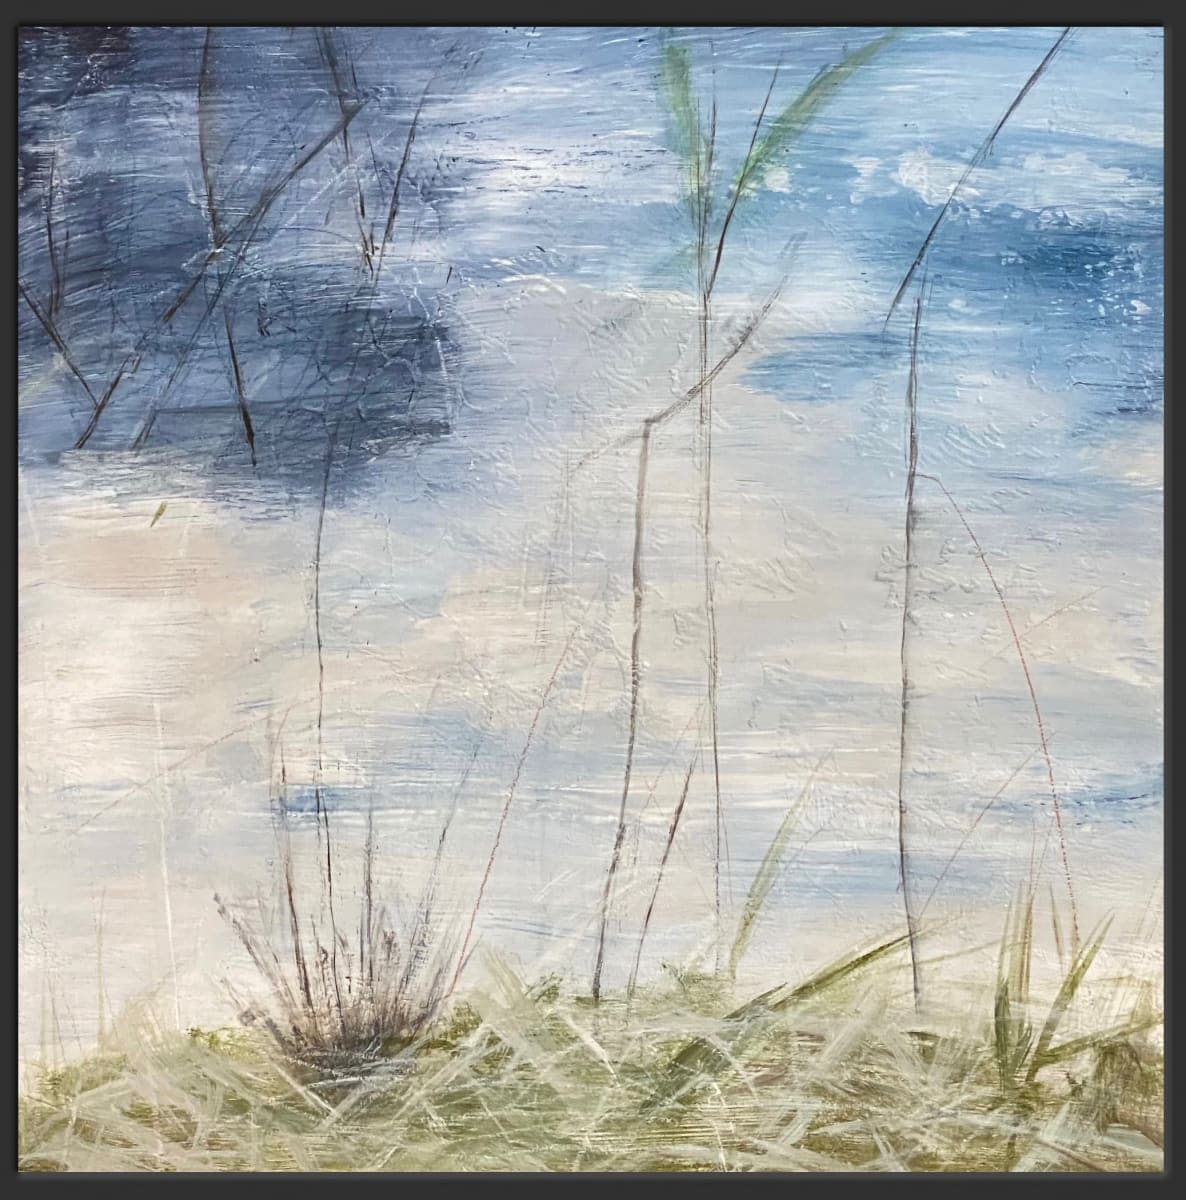 3-Caught up in grasses 3, From the Chestatee River portfolio, 2021, Acrylic on canvas, 12 x 12 inches. Framed by Juanita 